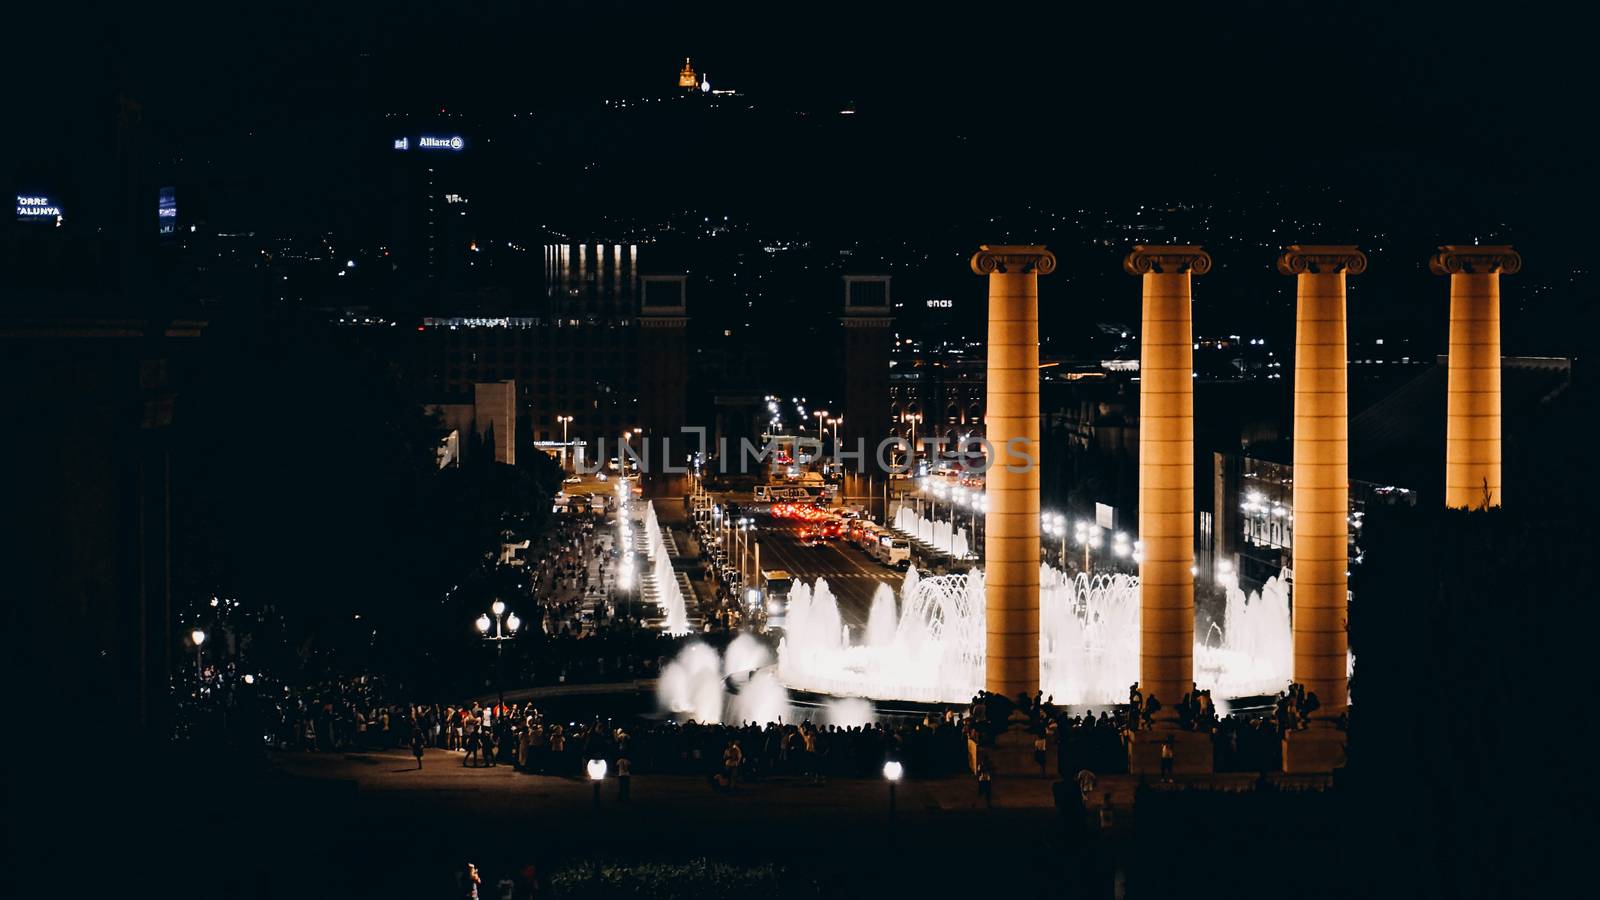 The night show of singing fountains in Barcelona. Spain